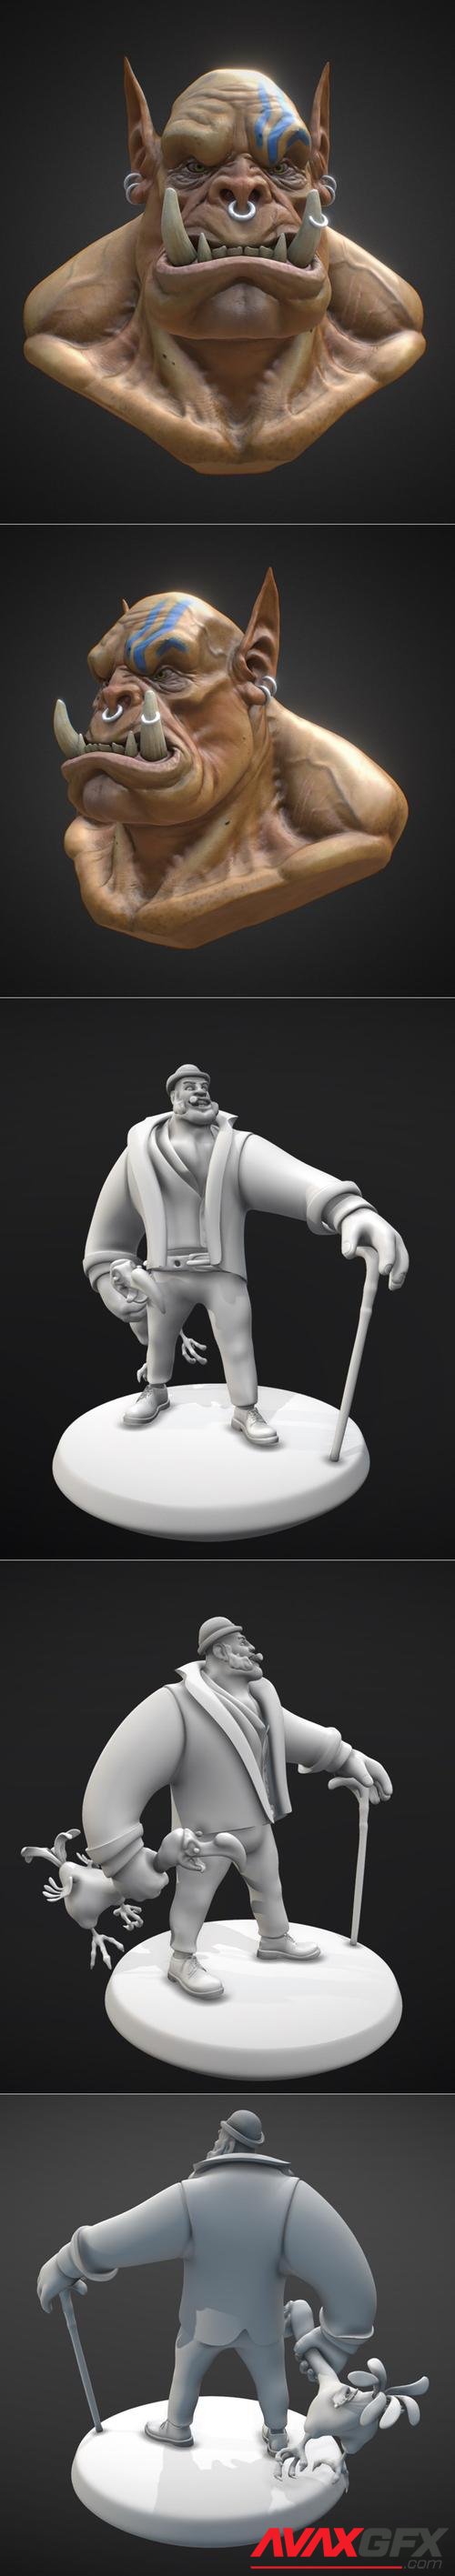 Orcish Bust and Mr Hyde – 3D Print